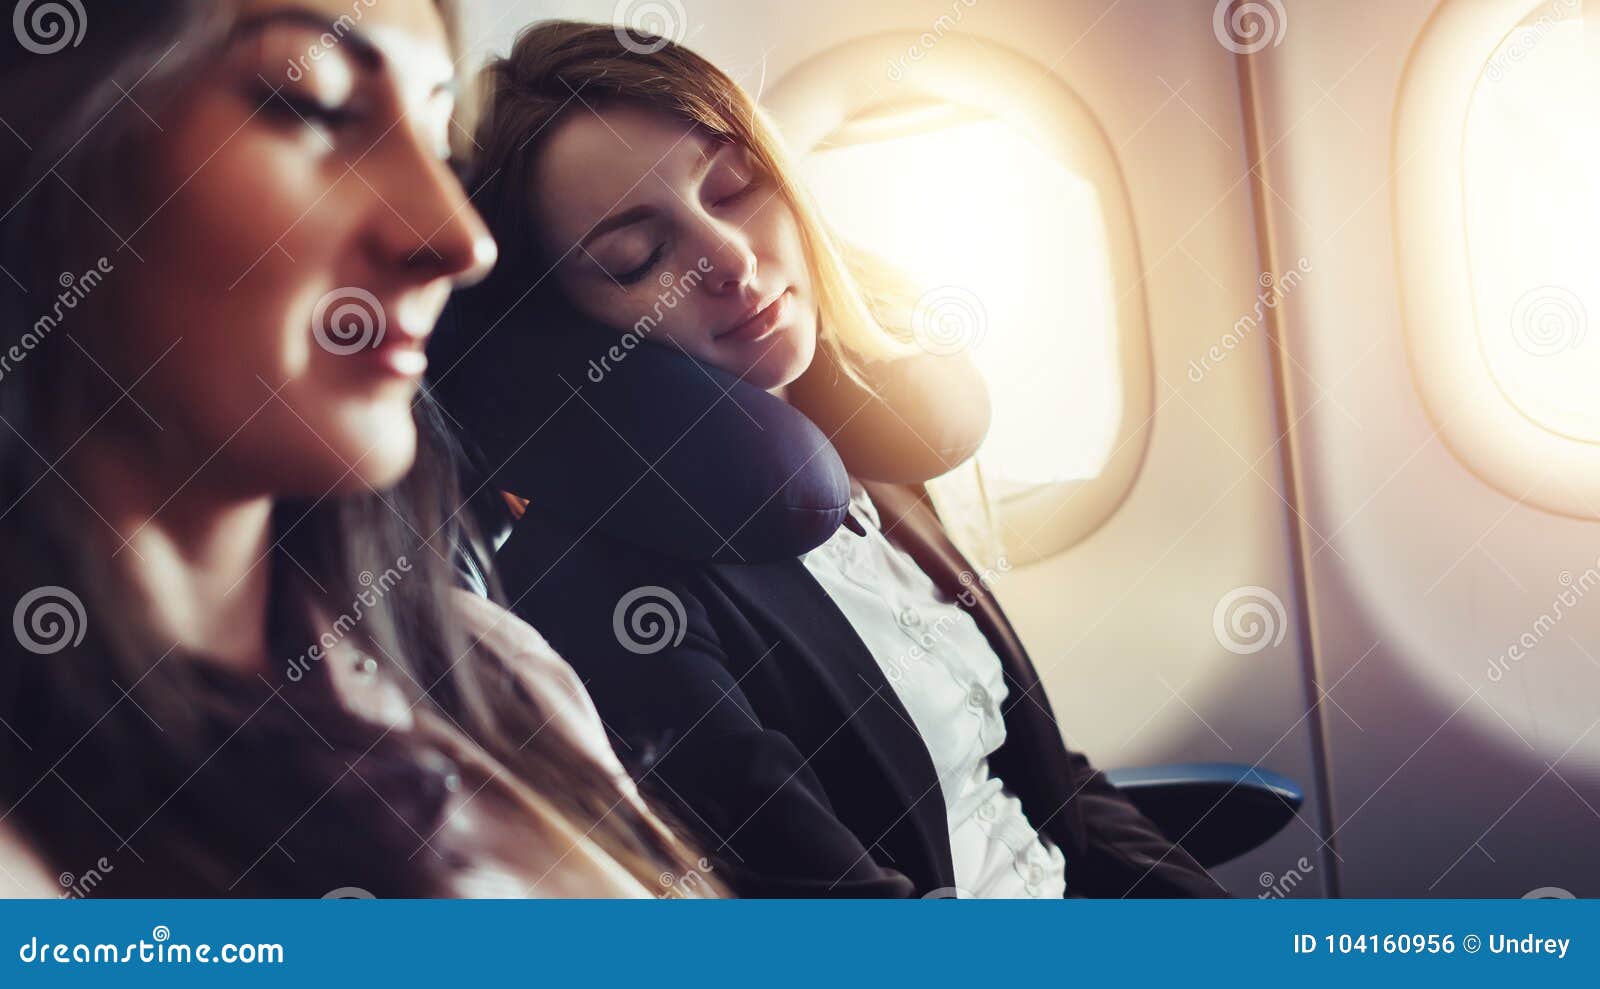 girlfriends traveling by plane. a female passenger sleeping on neck cushion in airplane.